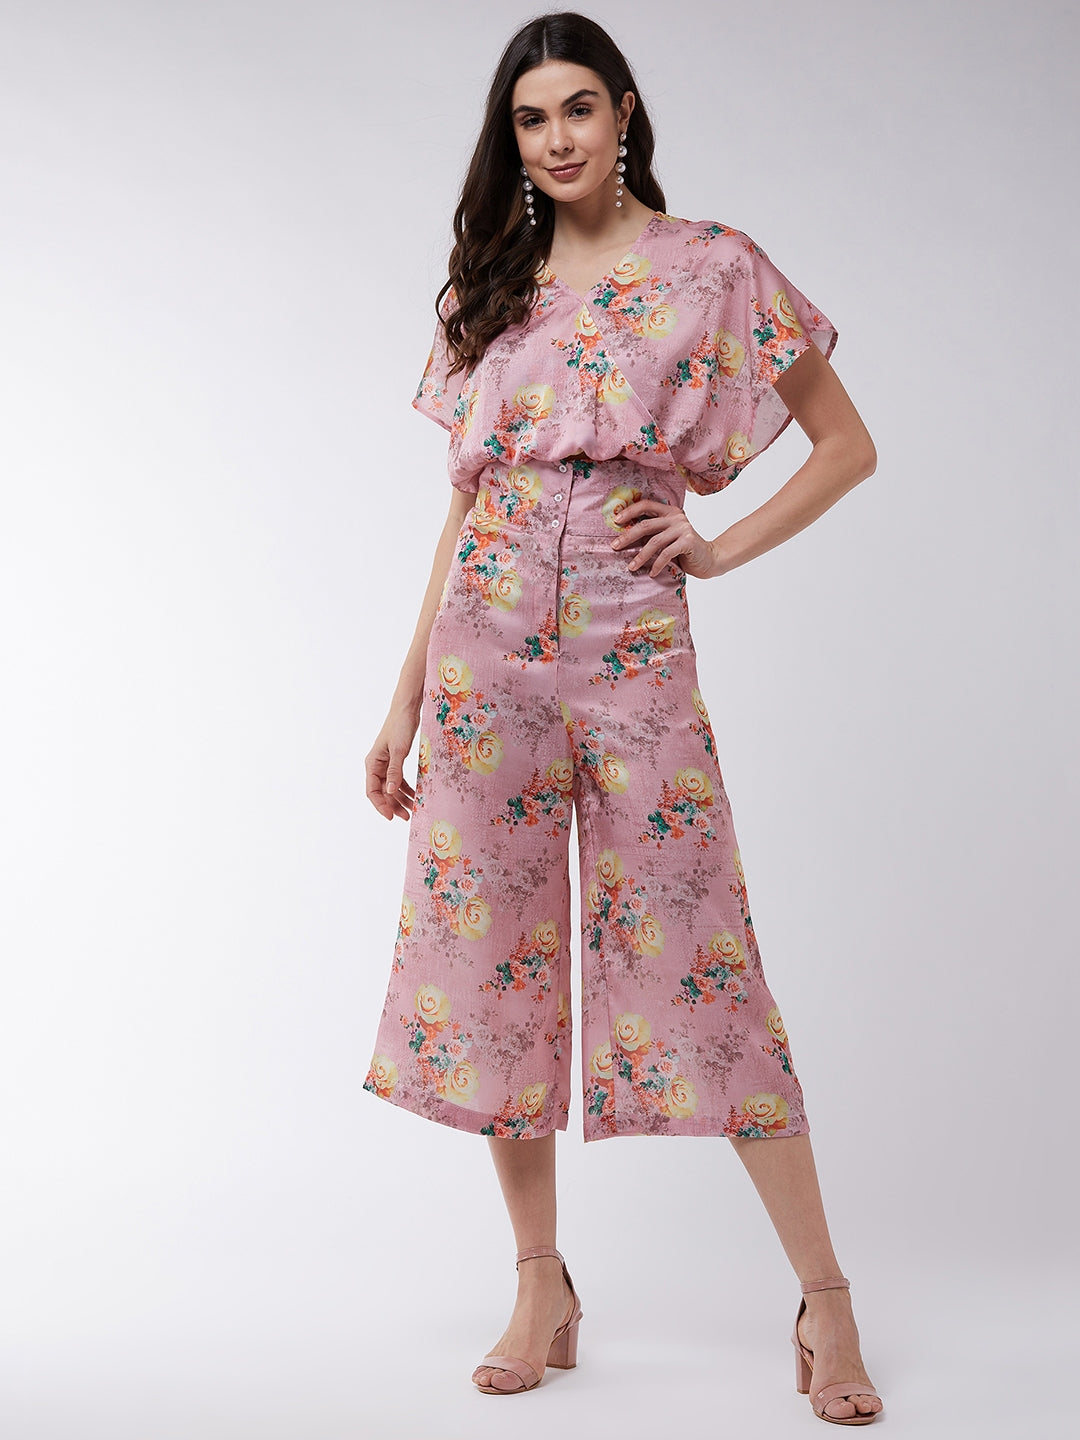 Candy Inspired Floral Digital Printed Loose Top With High Waist Pants